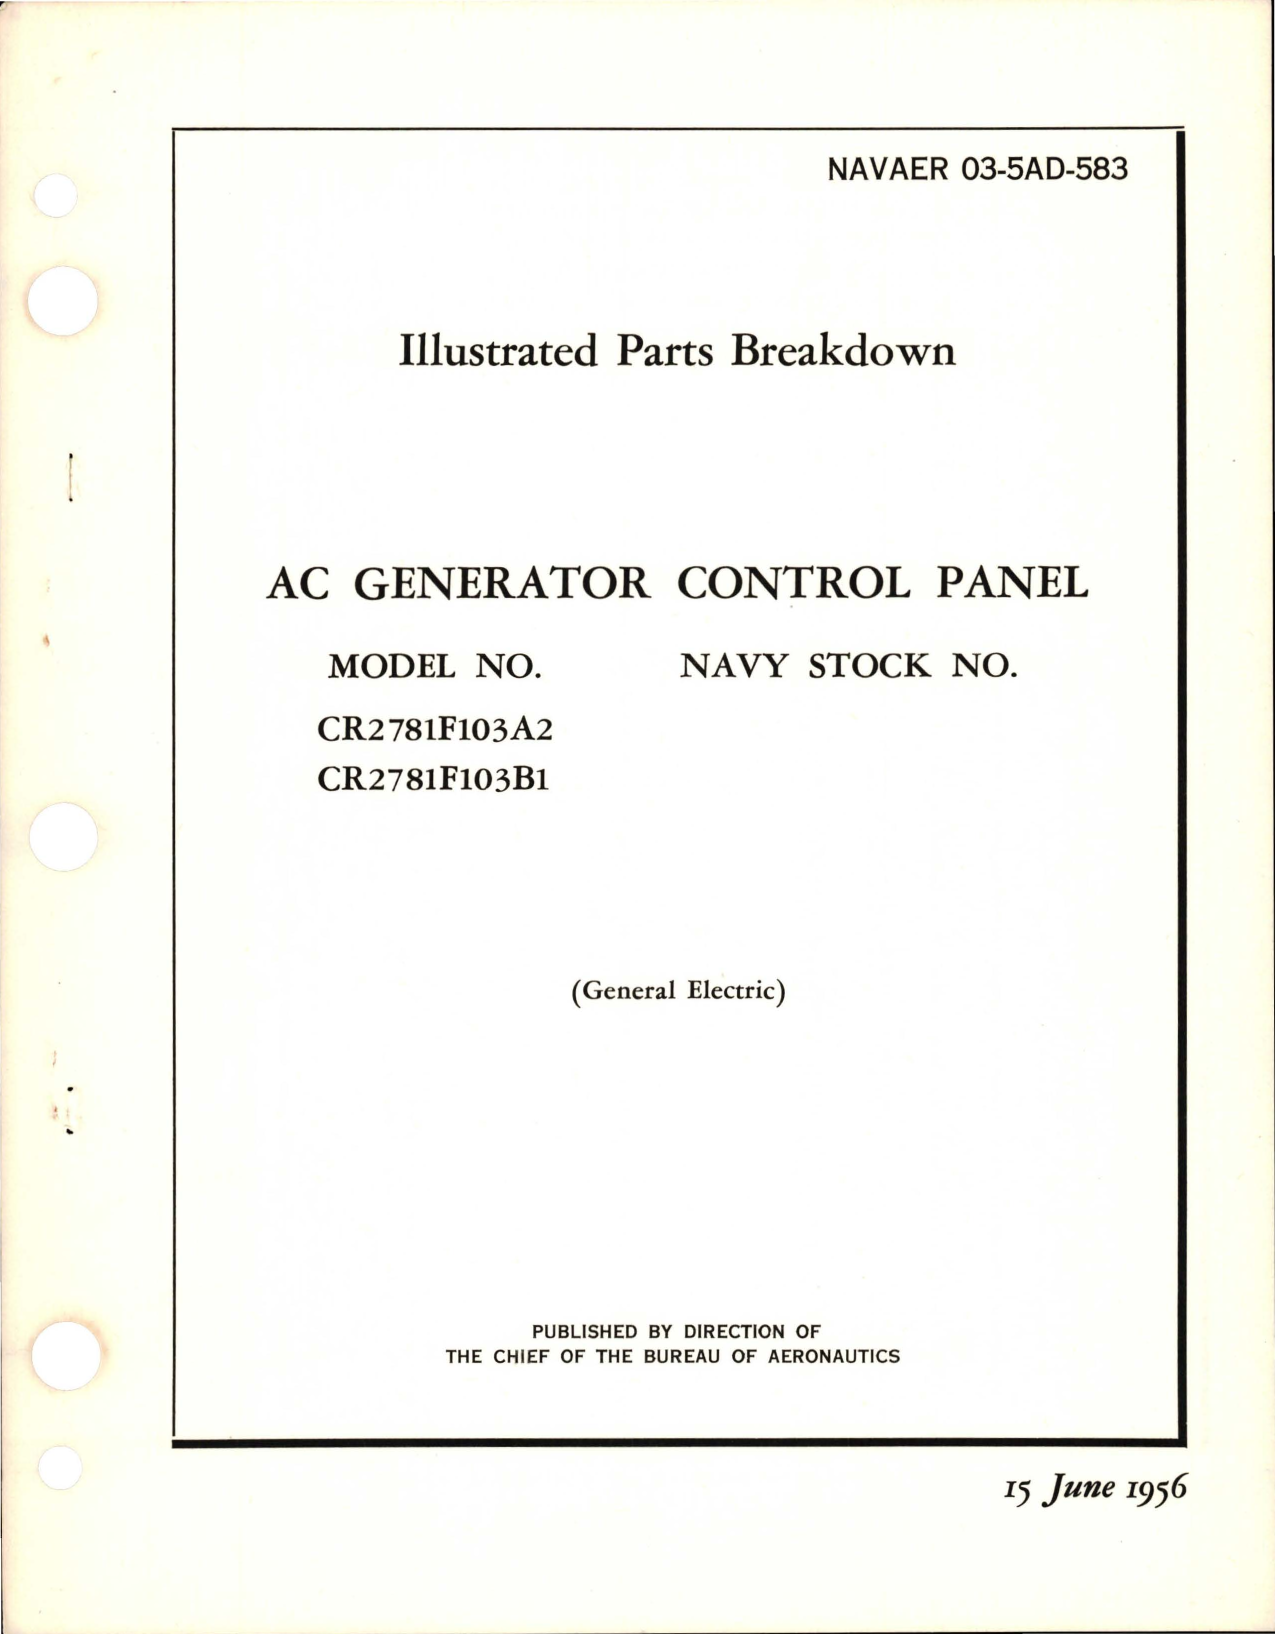 Sample page 1 from AirCorps Library document: Illustrated Parts Breakdown for AC Generator Control Panel - Models CR2781F103A2 and CR2781F103B1 